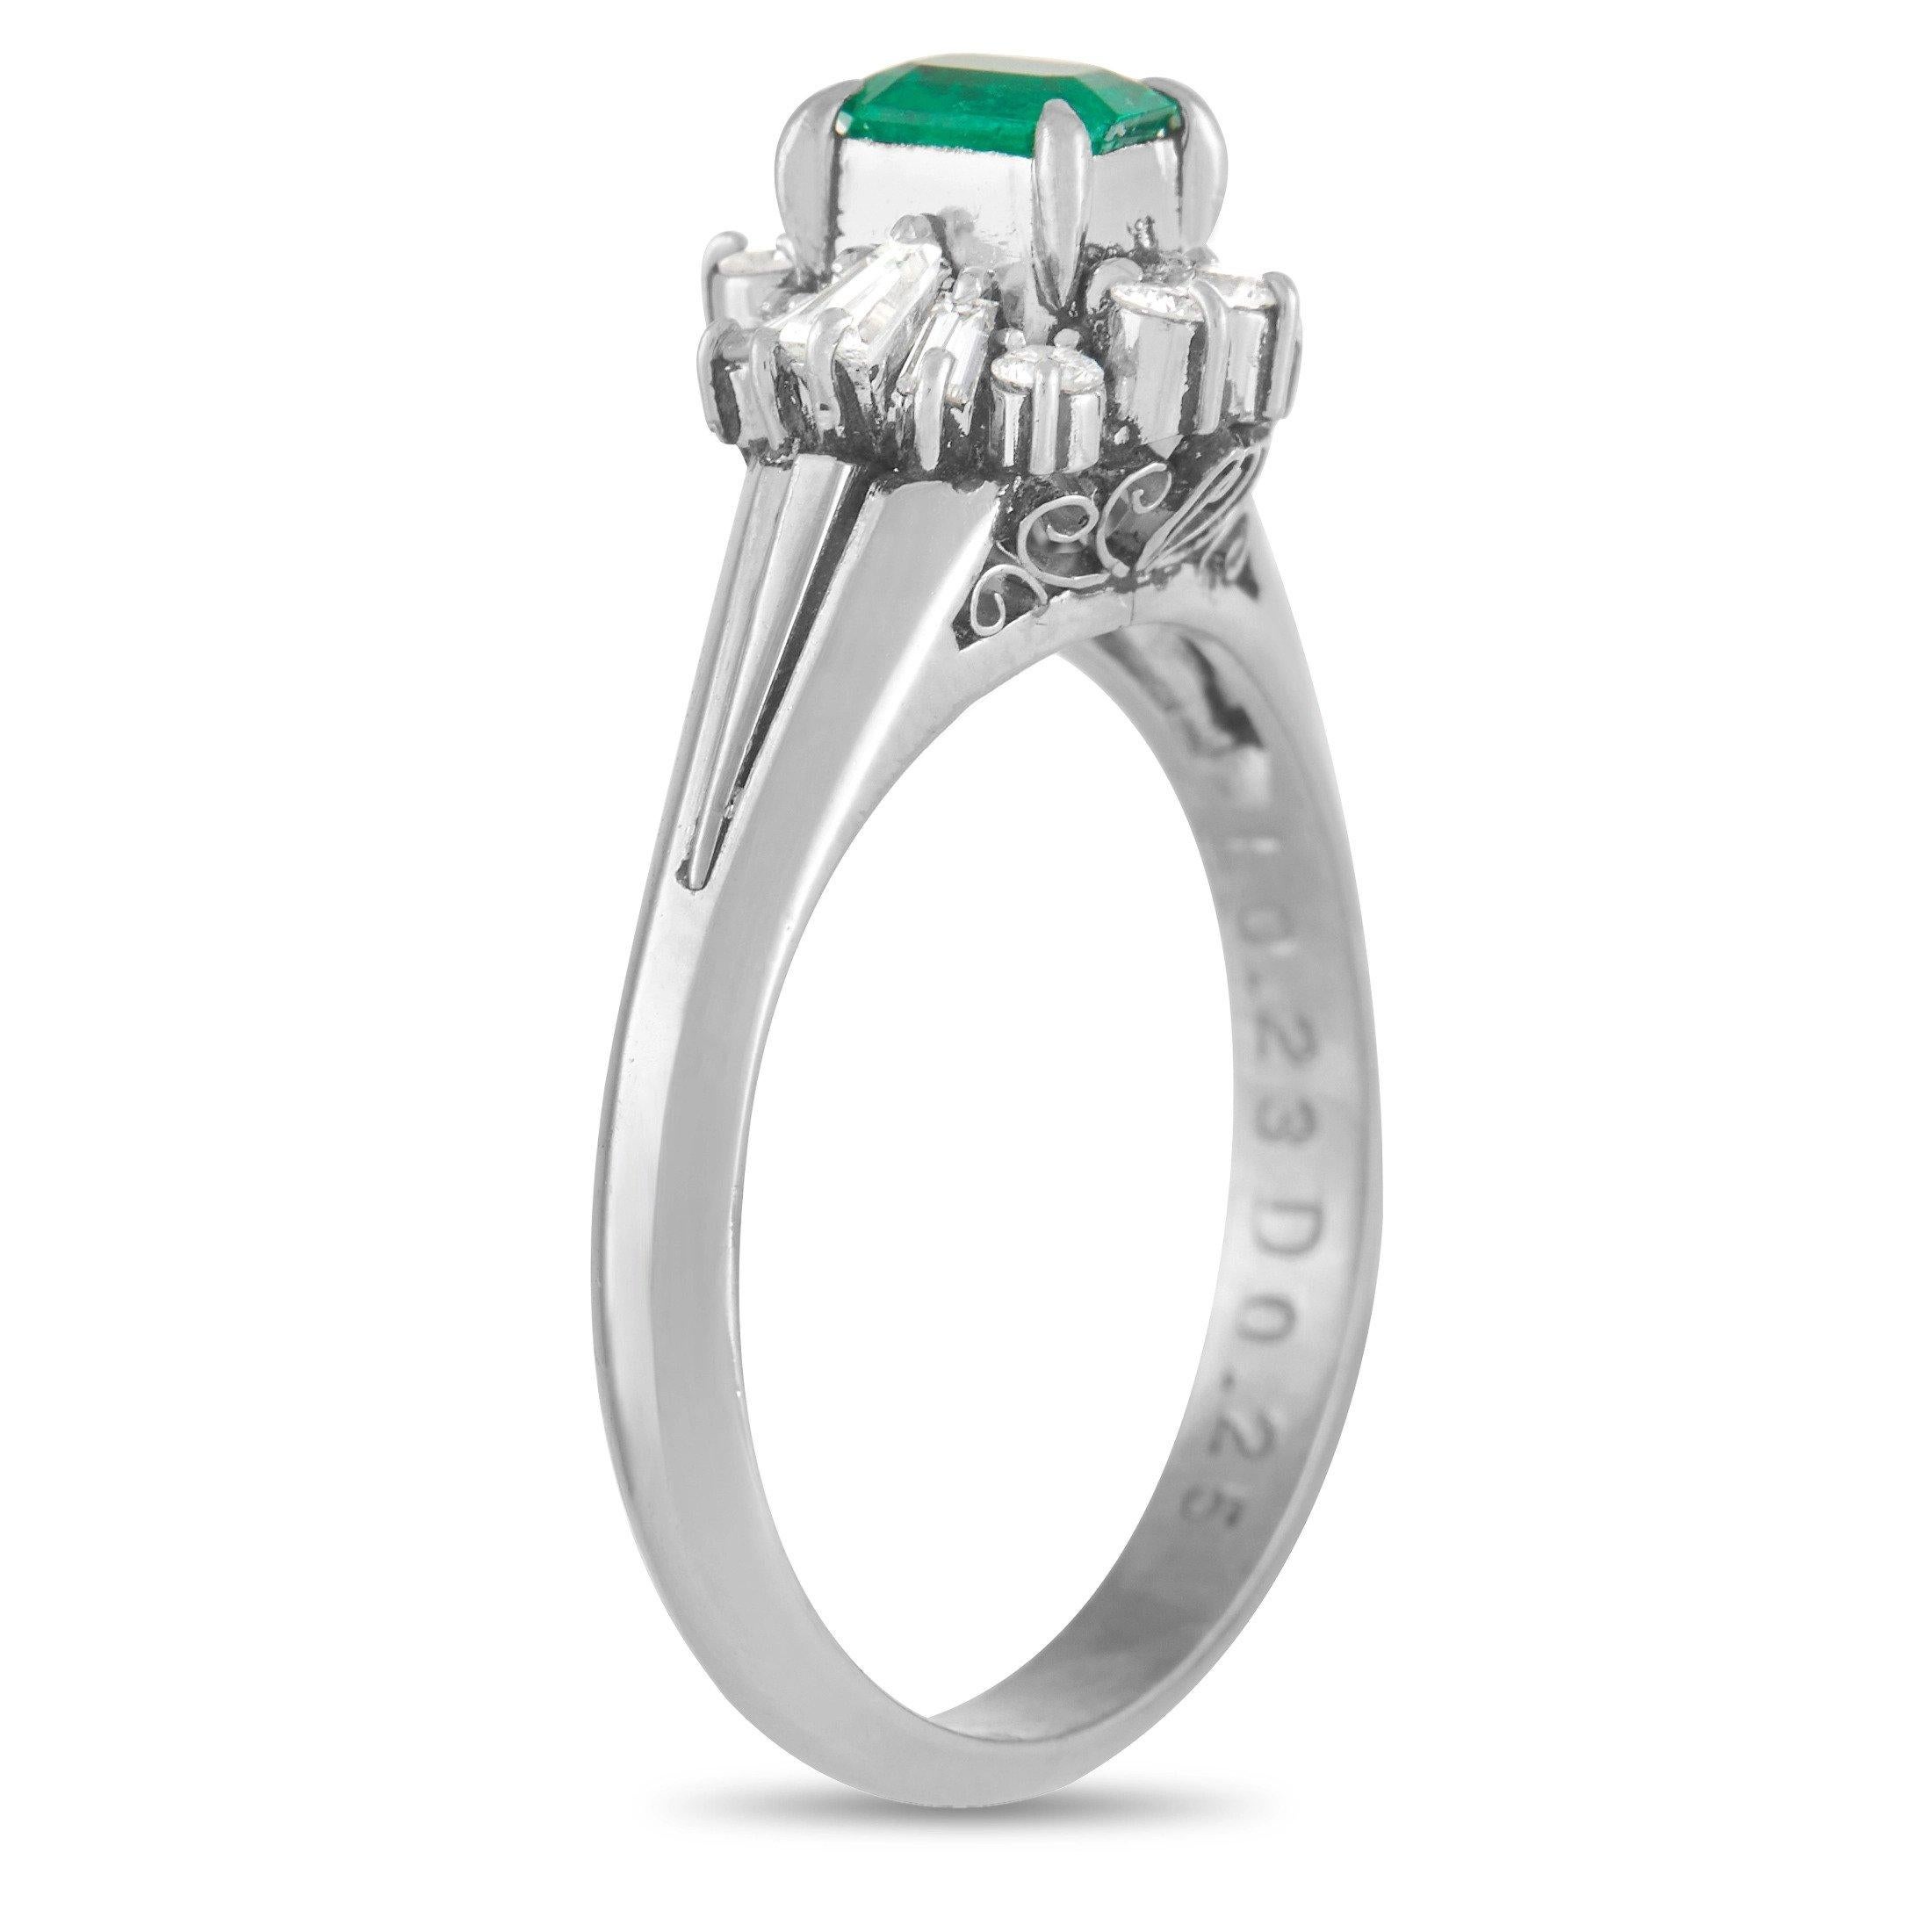 A pure platinum setting provides the perfection foundation for this timeless, elegant ring. A breathtaking green 0.23 carat emerald center stone comes to life thanks to a glittering starburst halo of diamonds with a total weight of 0.25 carats. This